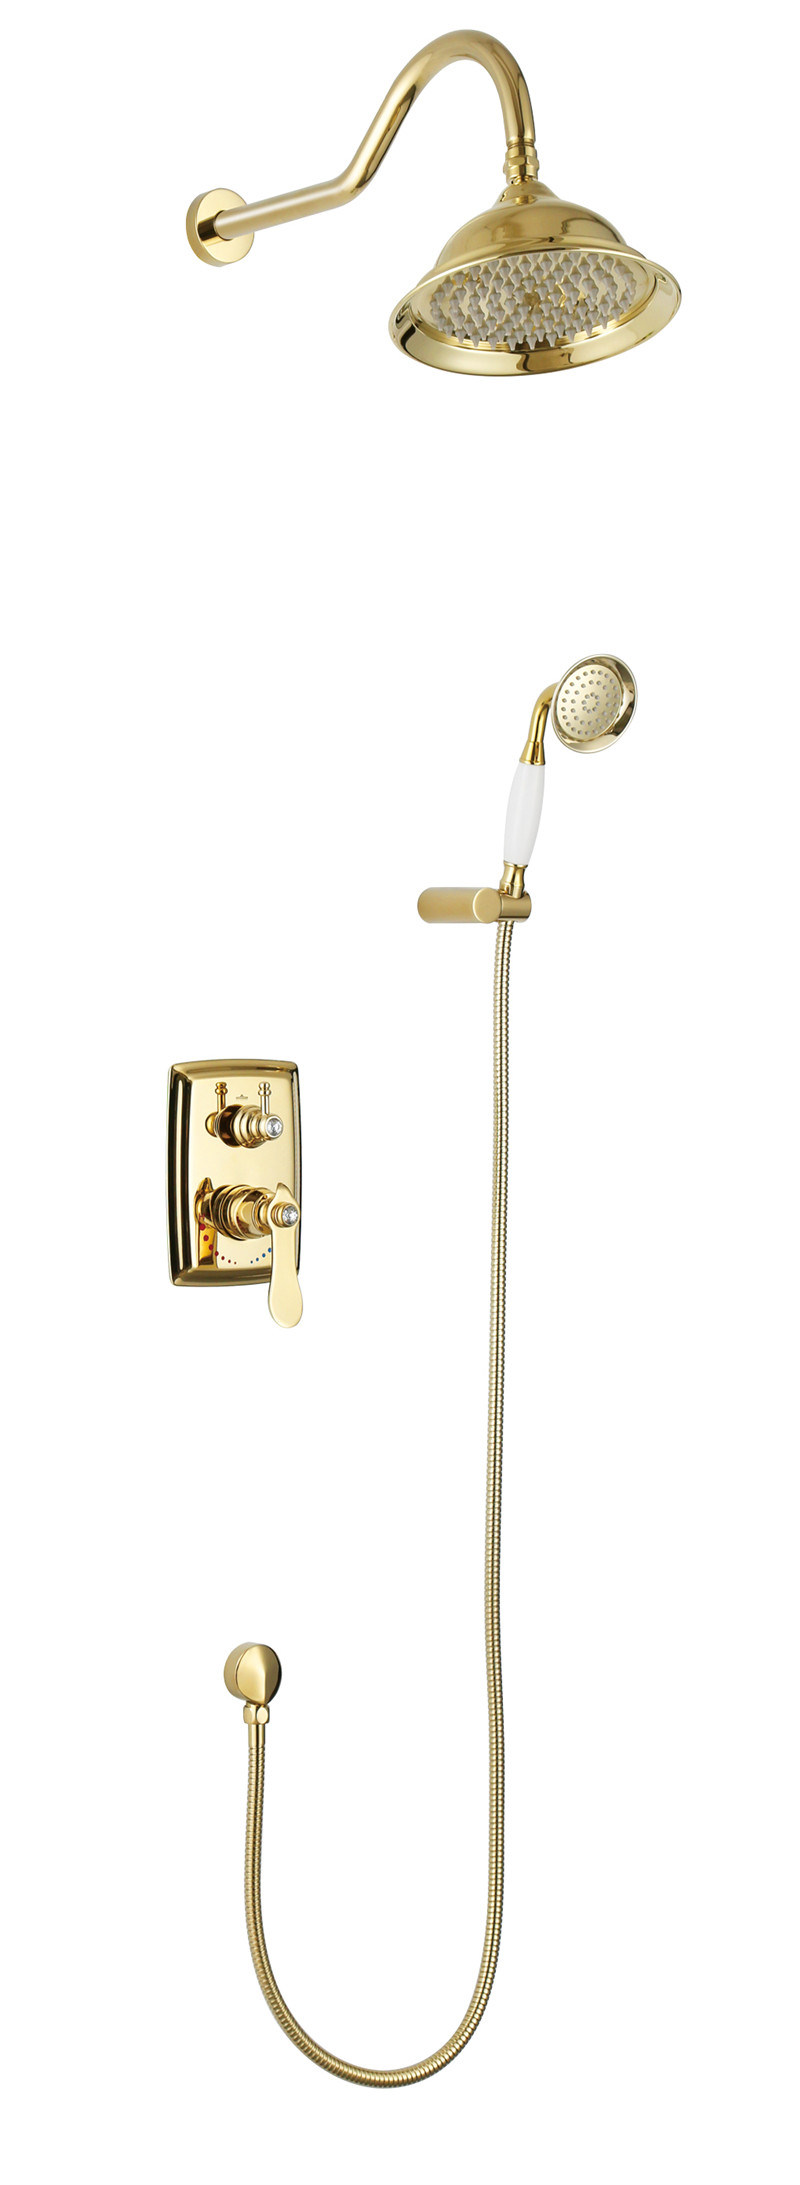 Wall Mounted Antique Brass Concealed Shower Set (zf-W42)